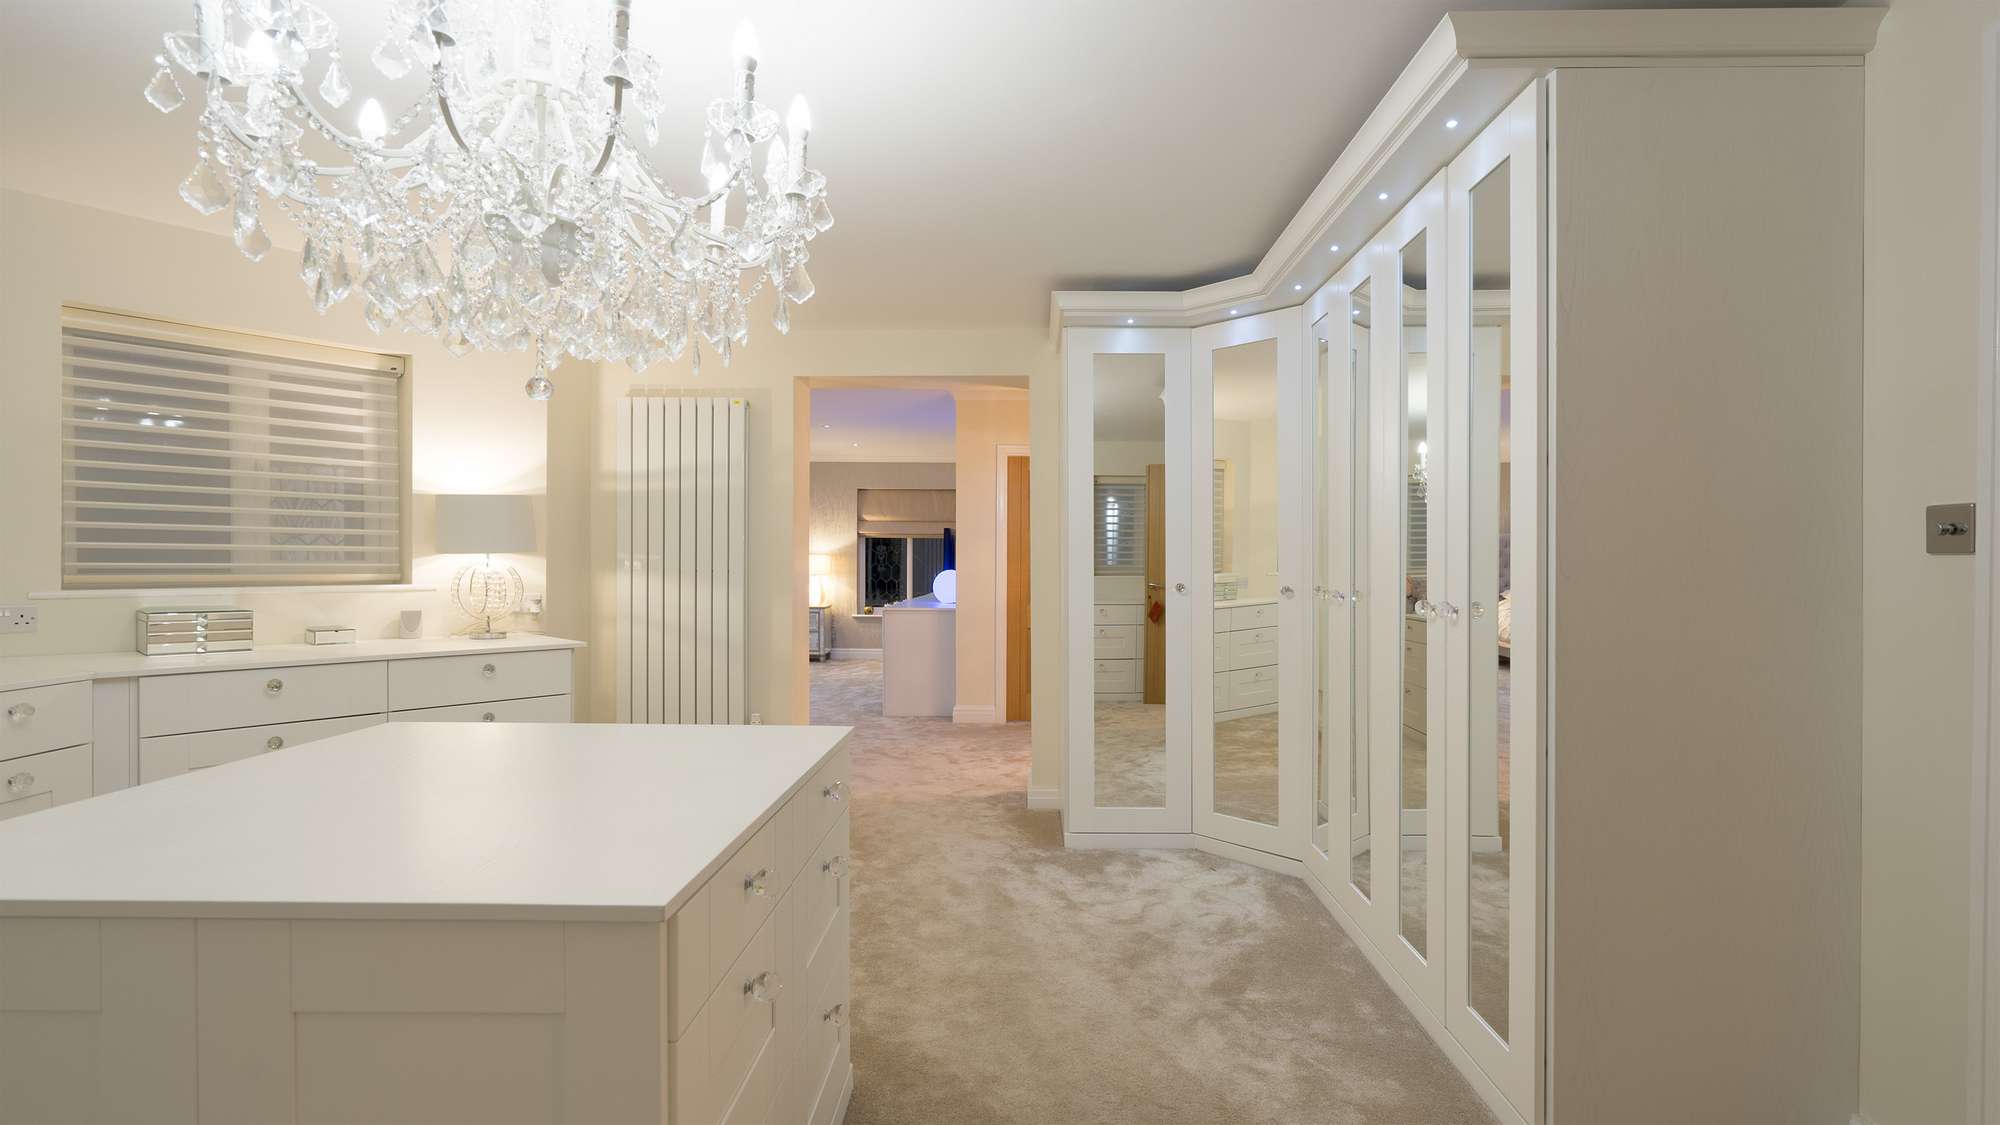 Fitted Bedroom furniture Livrpool, featuring mirrored wardrobes, shaker doors and fitted drawer units.